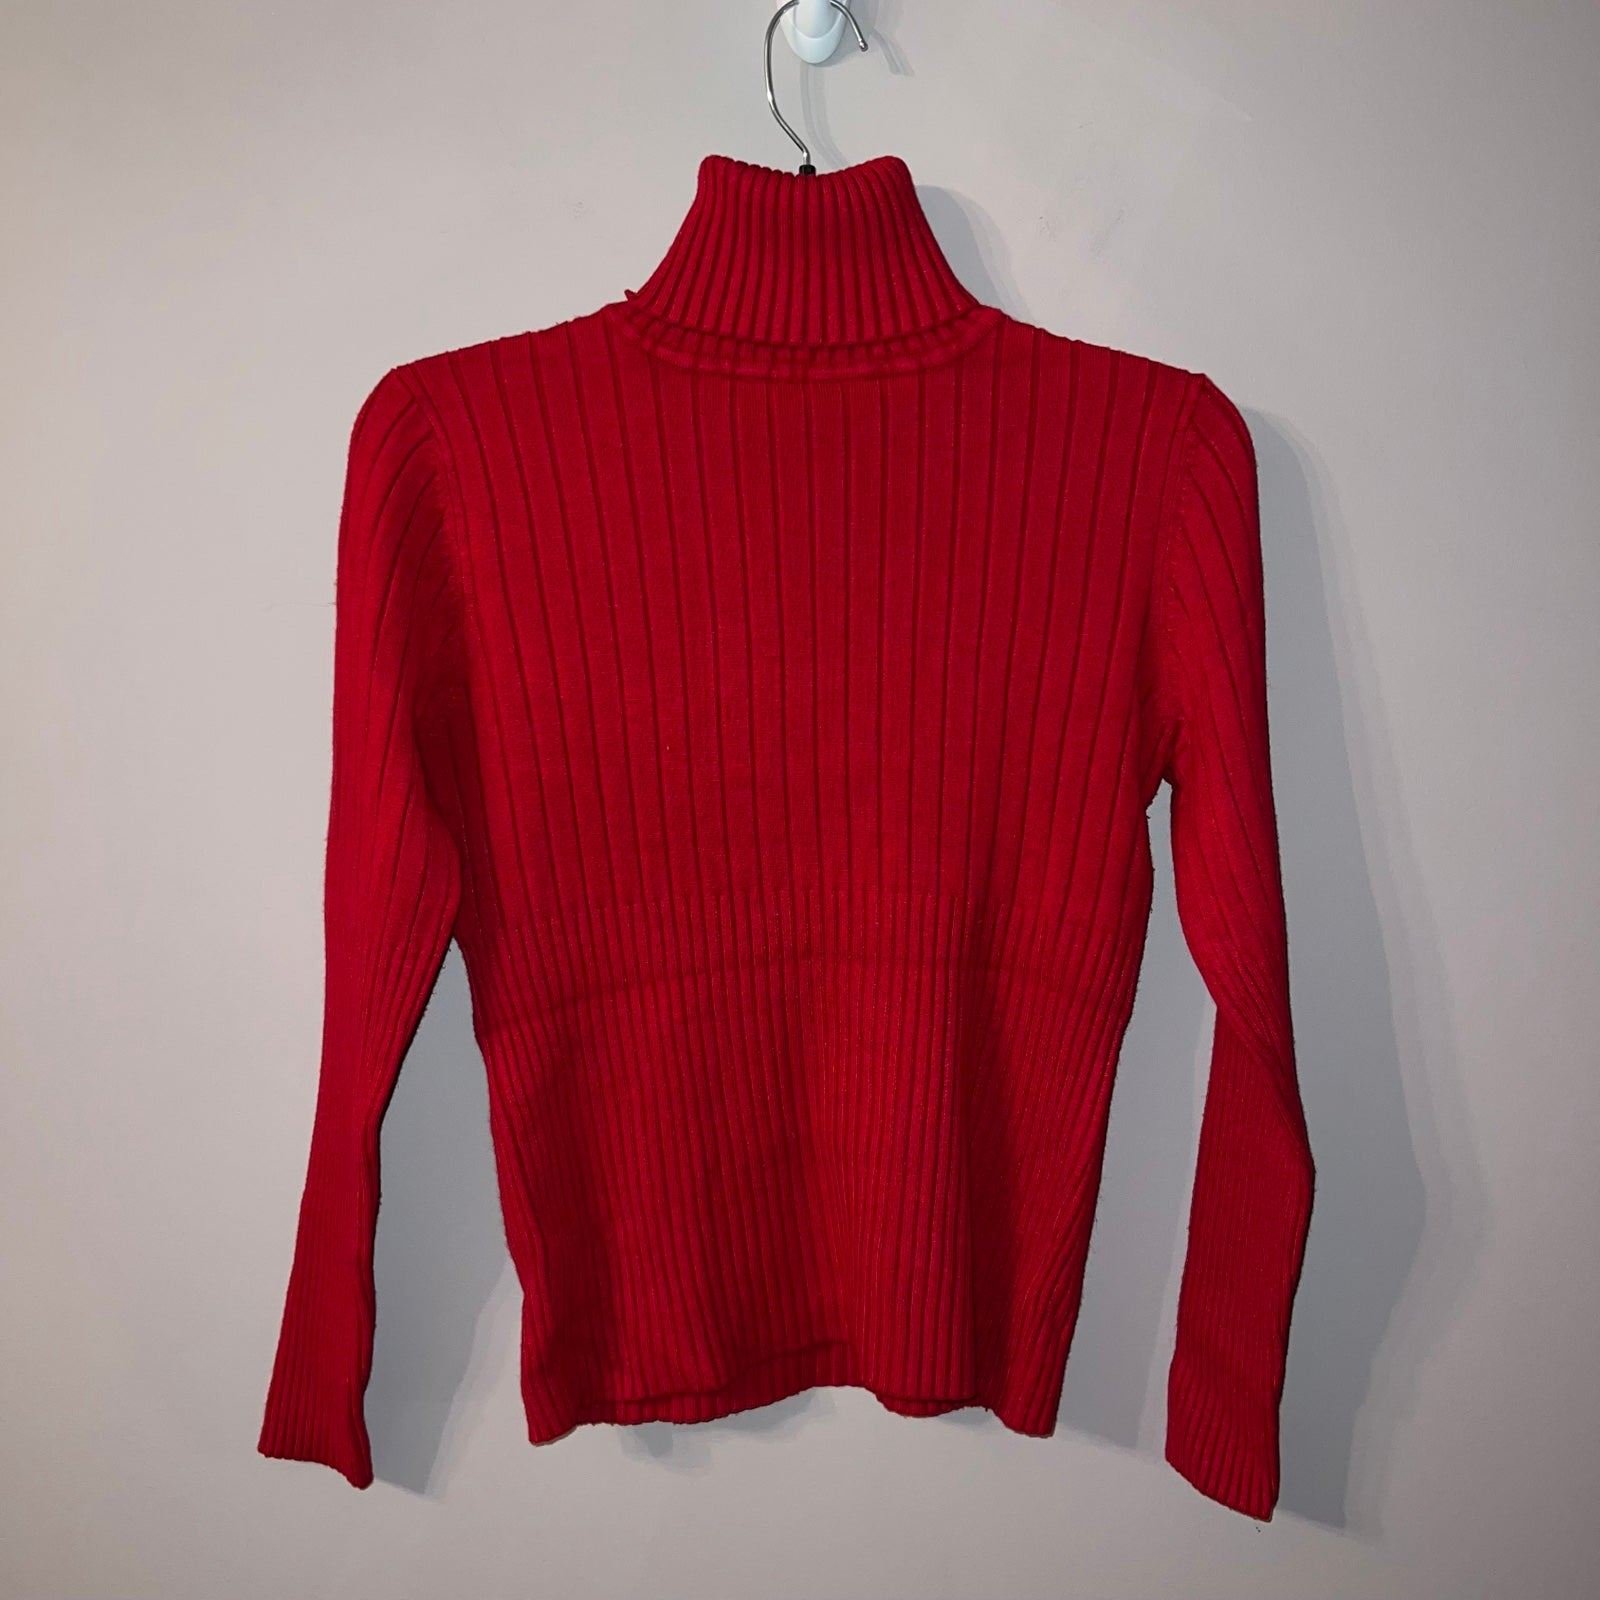 Buy Red ribbed turtleneck sweater women’s small oS8V3GK